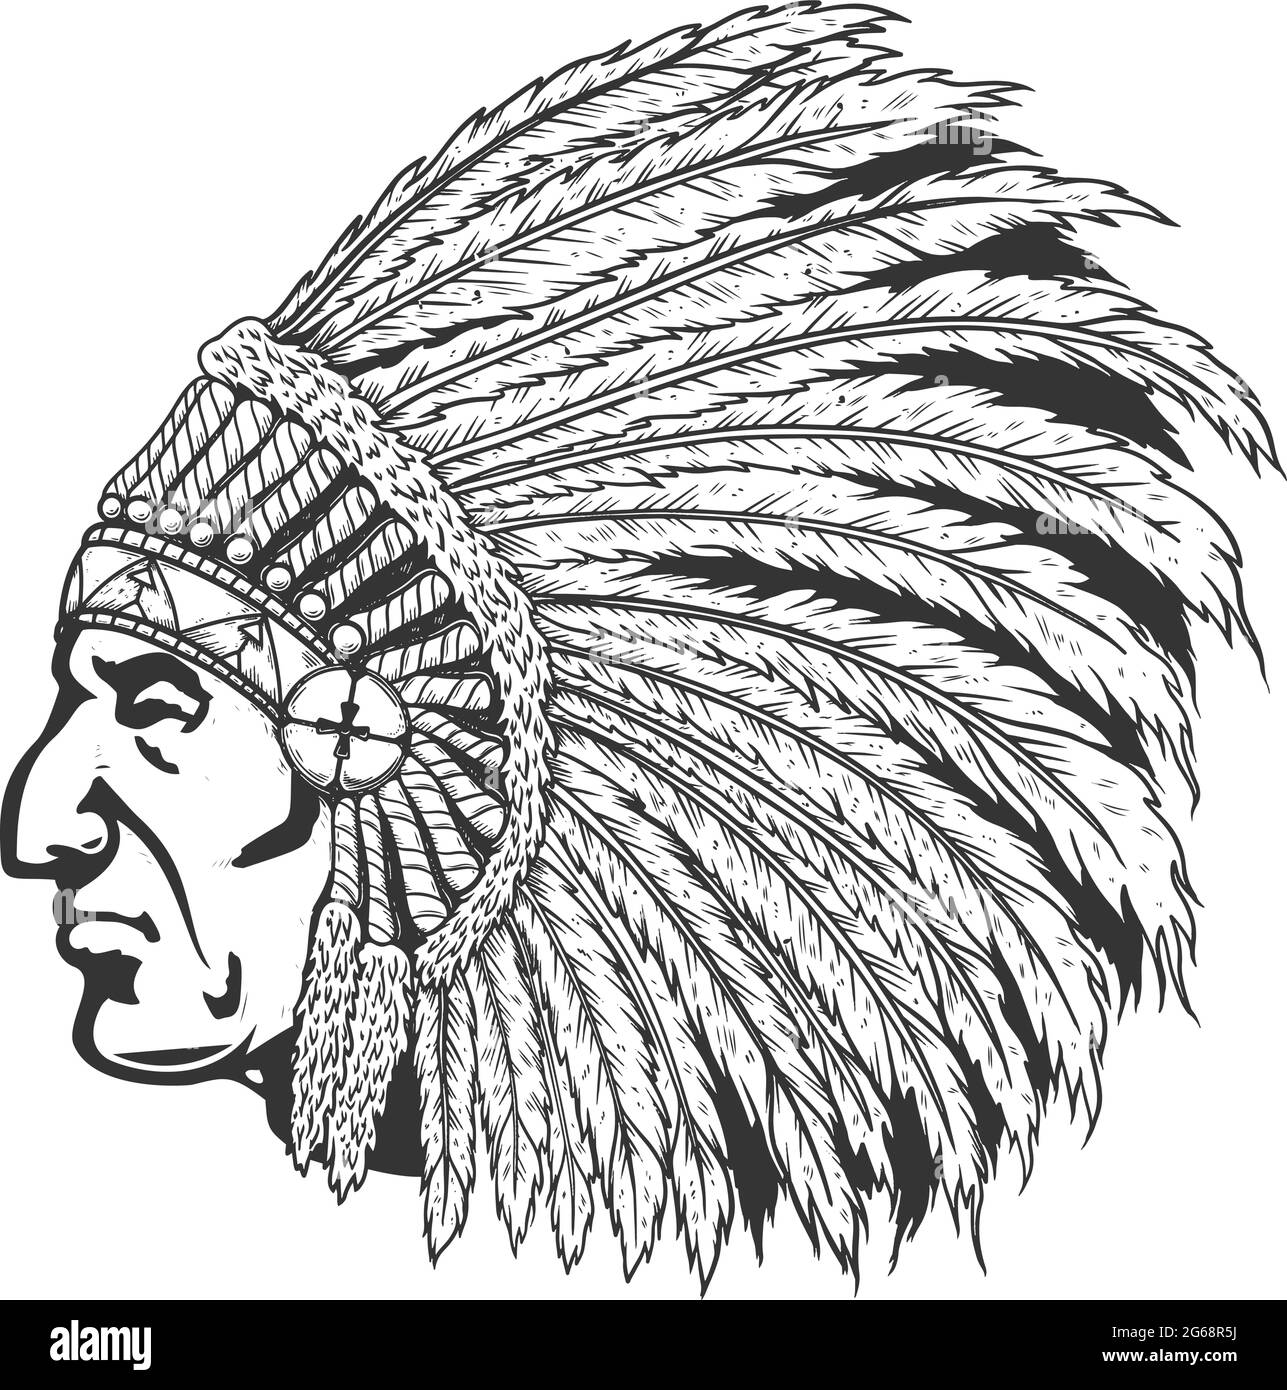 Illustration of native american chief head in traditional headdress. Design element for logo, label, sign, emblem, poster. Vector illustration Stock Vector